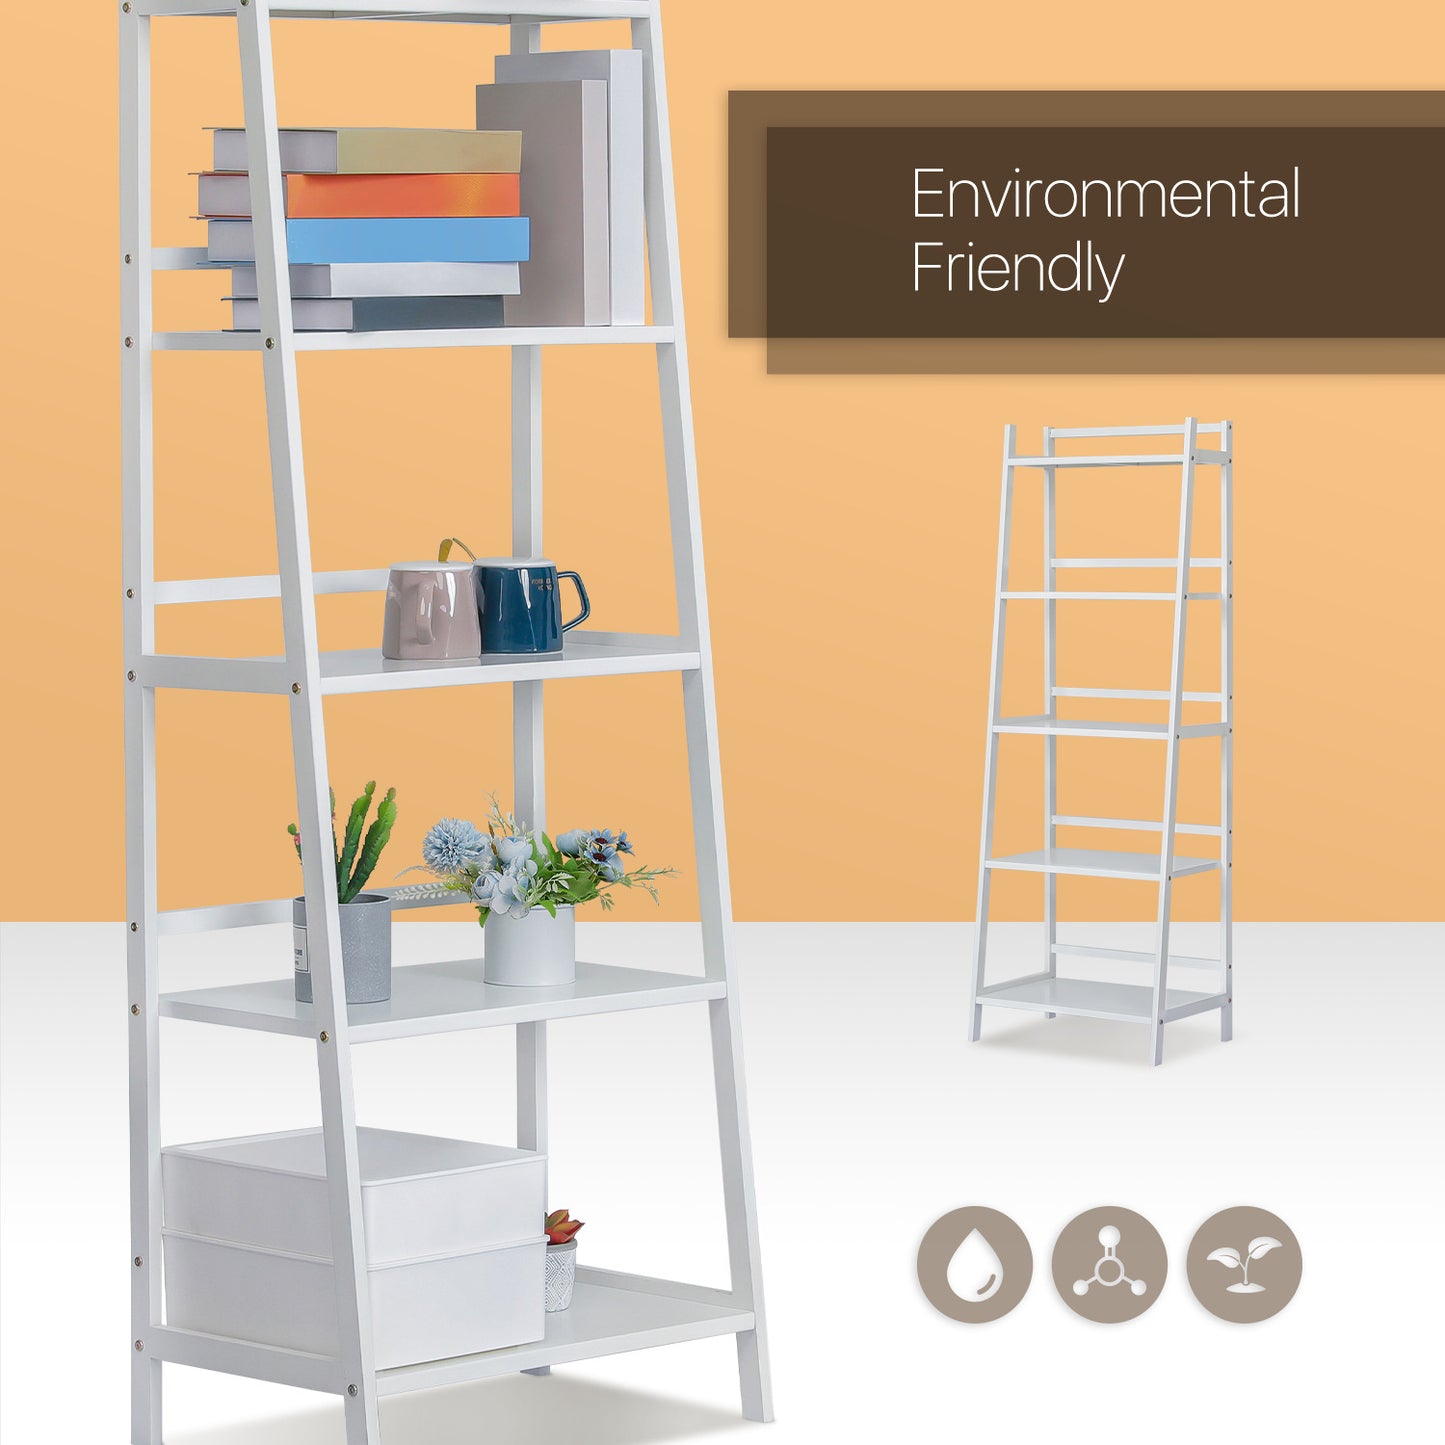 Simplified Trapezoid Multi-Functional Flower Plant Rack - 5 Tier - White